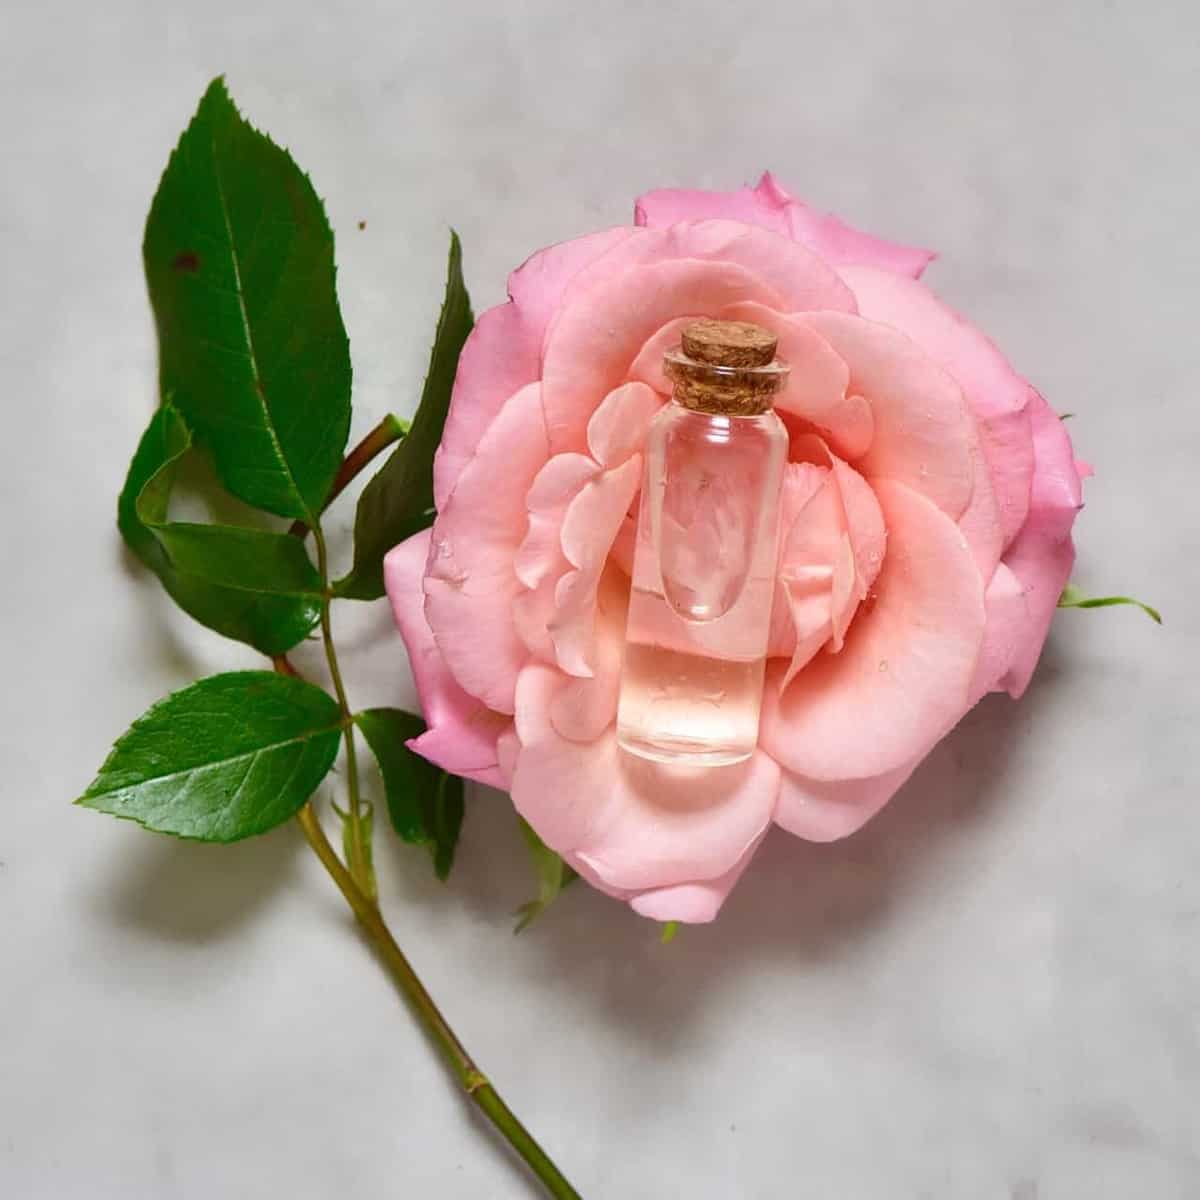 Homemade rose water in a glass vial placed onto of a rose flower